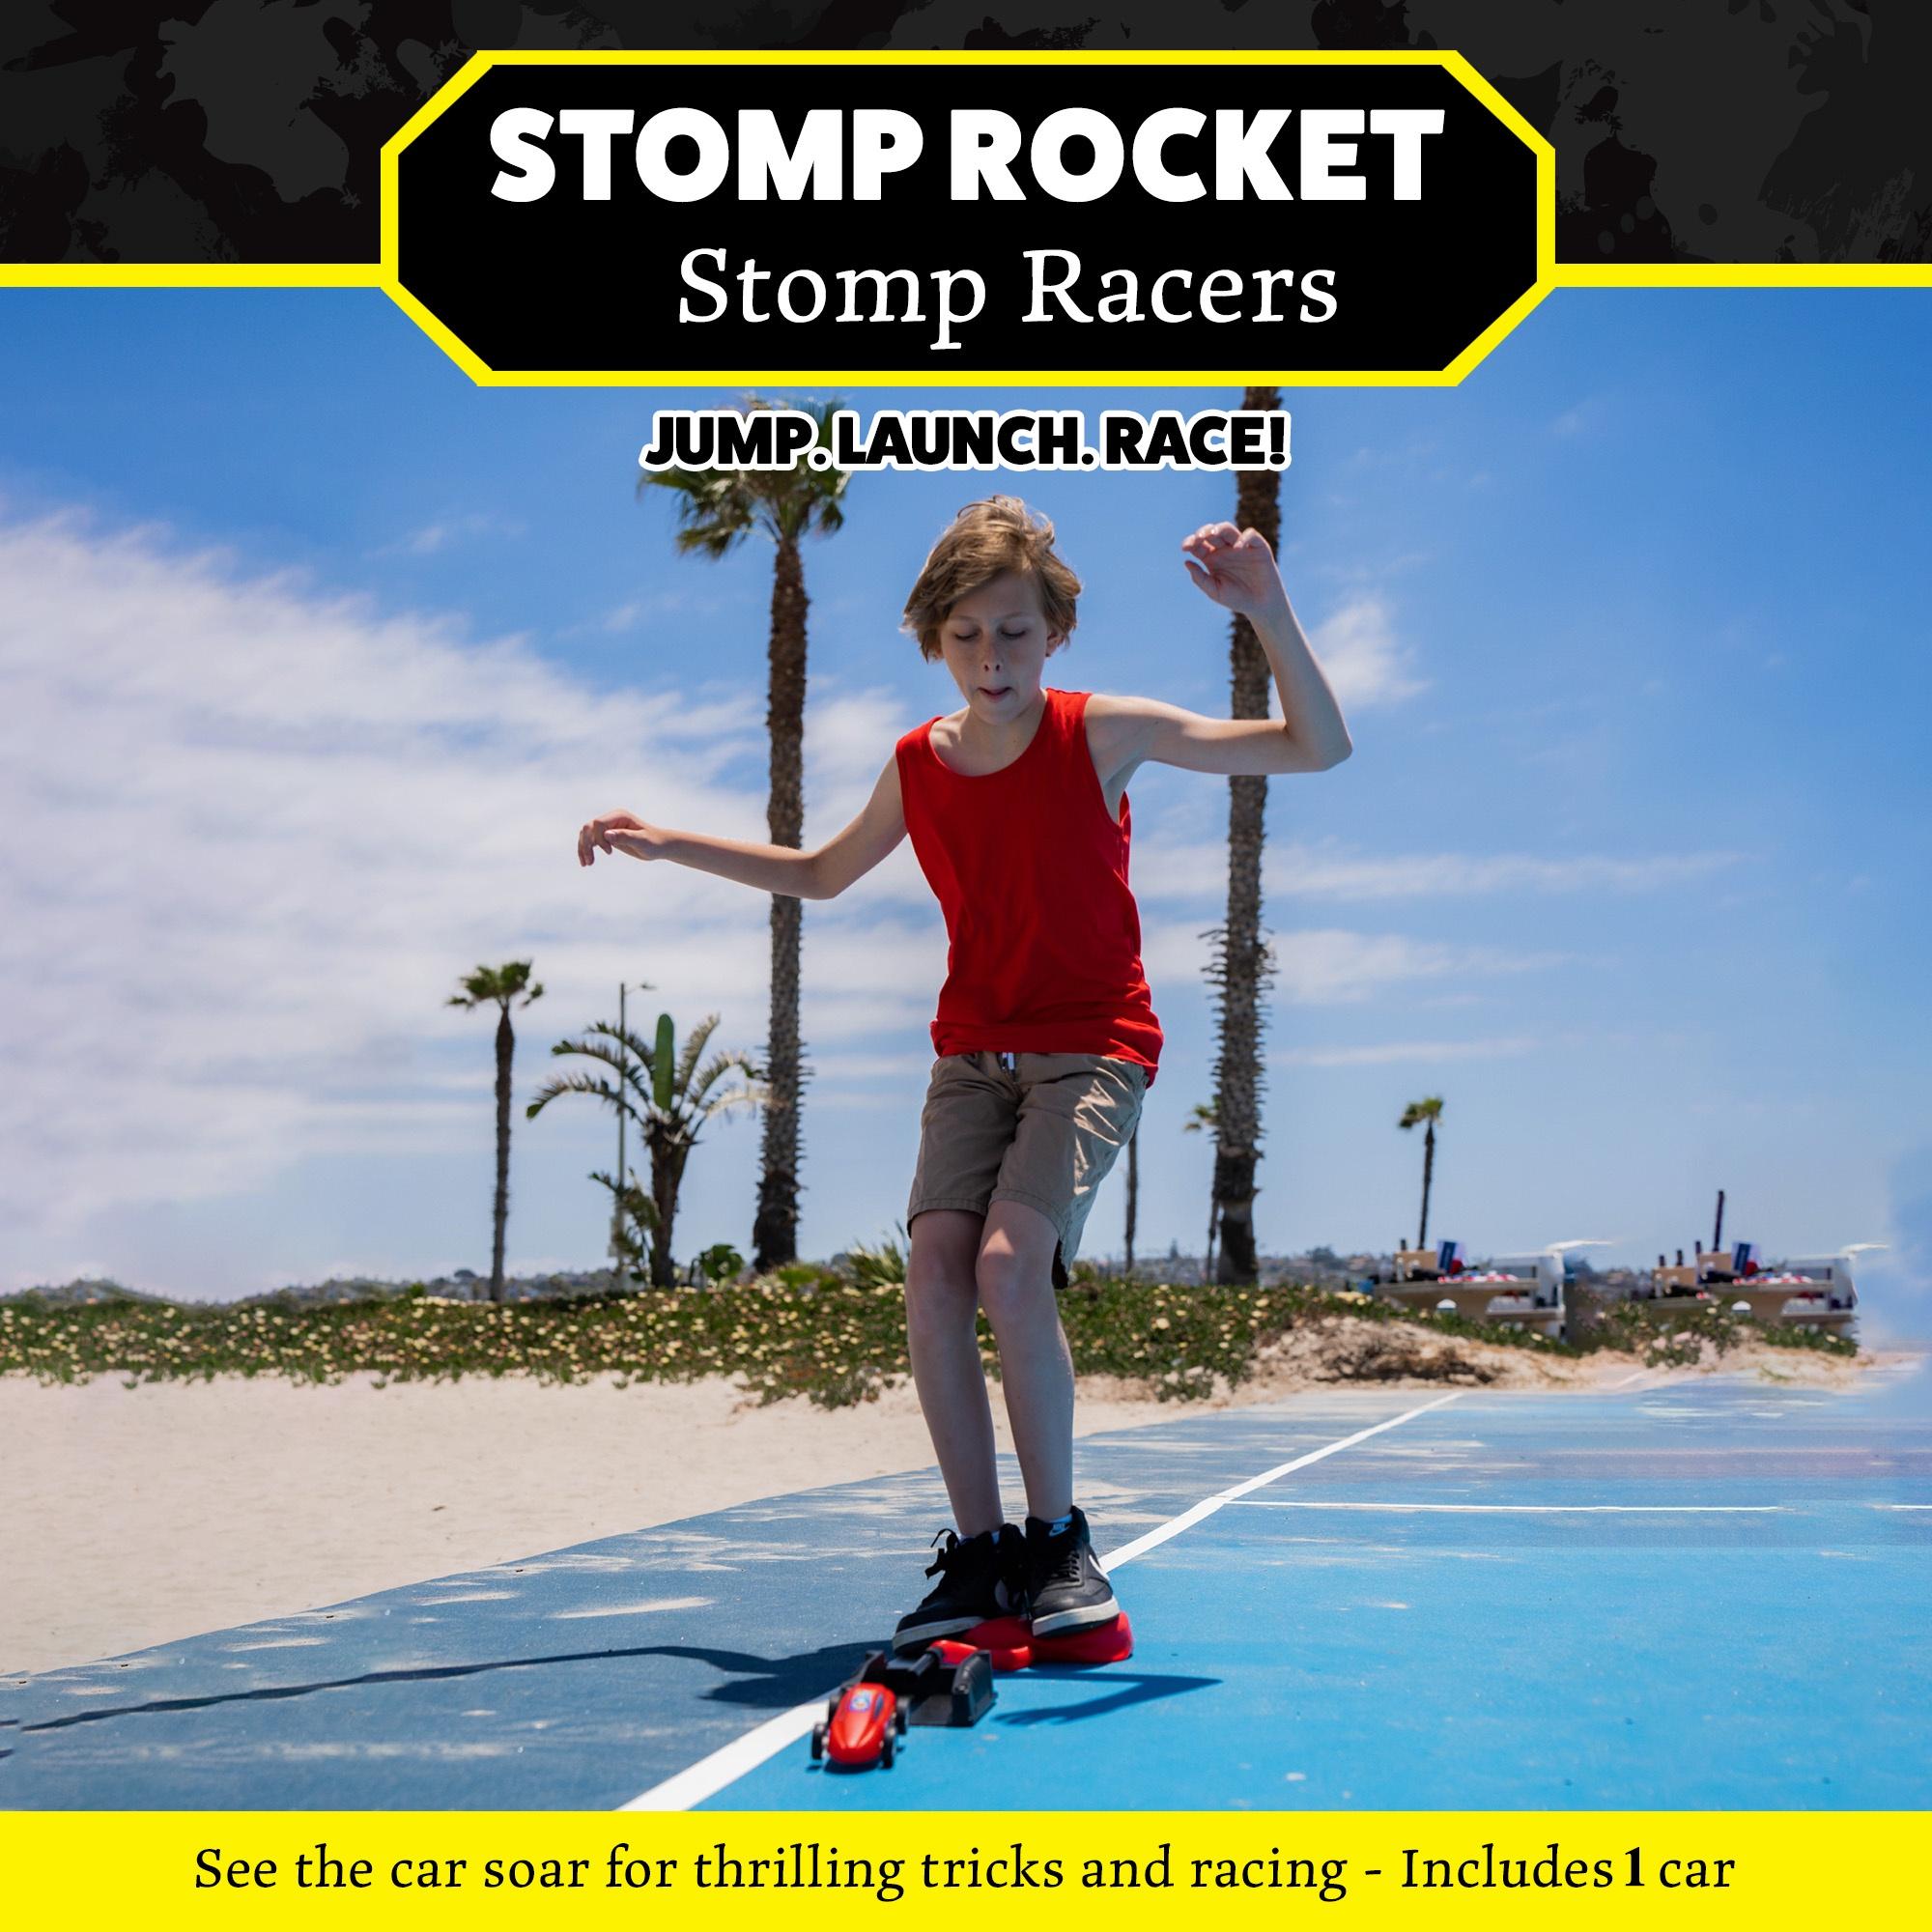 Stomp Racers Air Powered Race Cars by Stomp Rocket, Single Racer Pack - Dueling Stomp Racers Toy Car Launcher - Fun Backyard & Outdoor Multi-Player Kids Toys Gifts for Boys, Girls & Toddlers - image 3 of 7